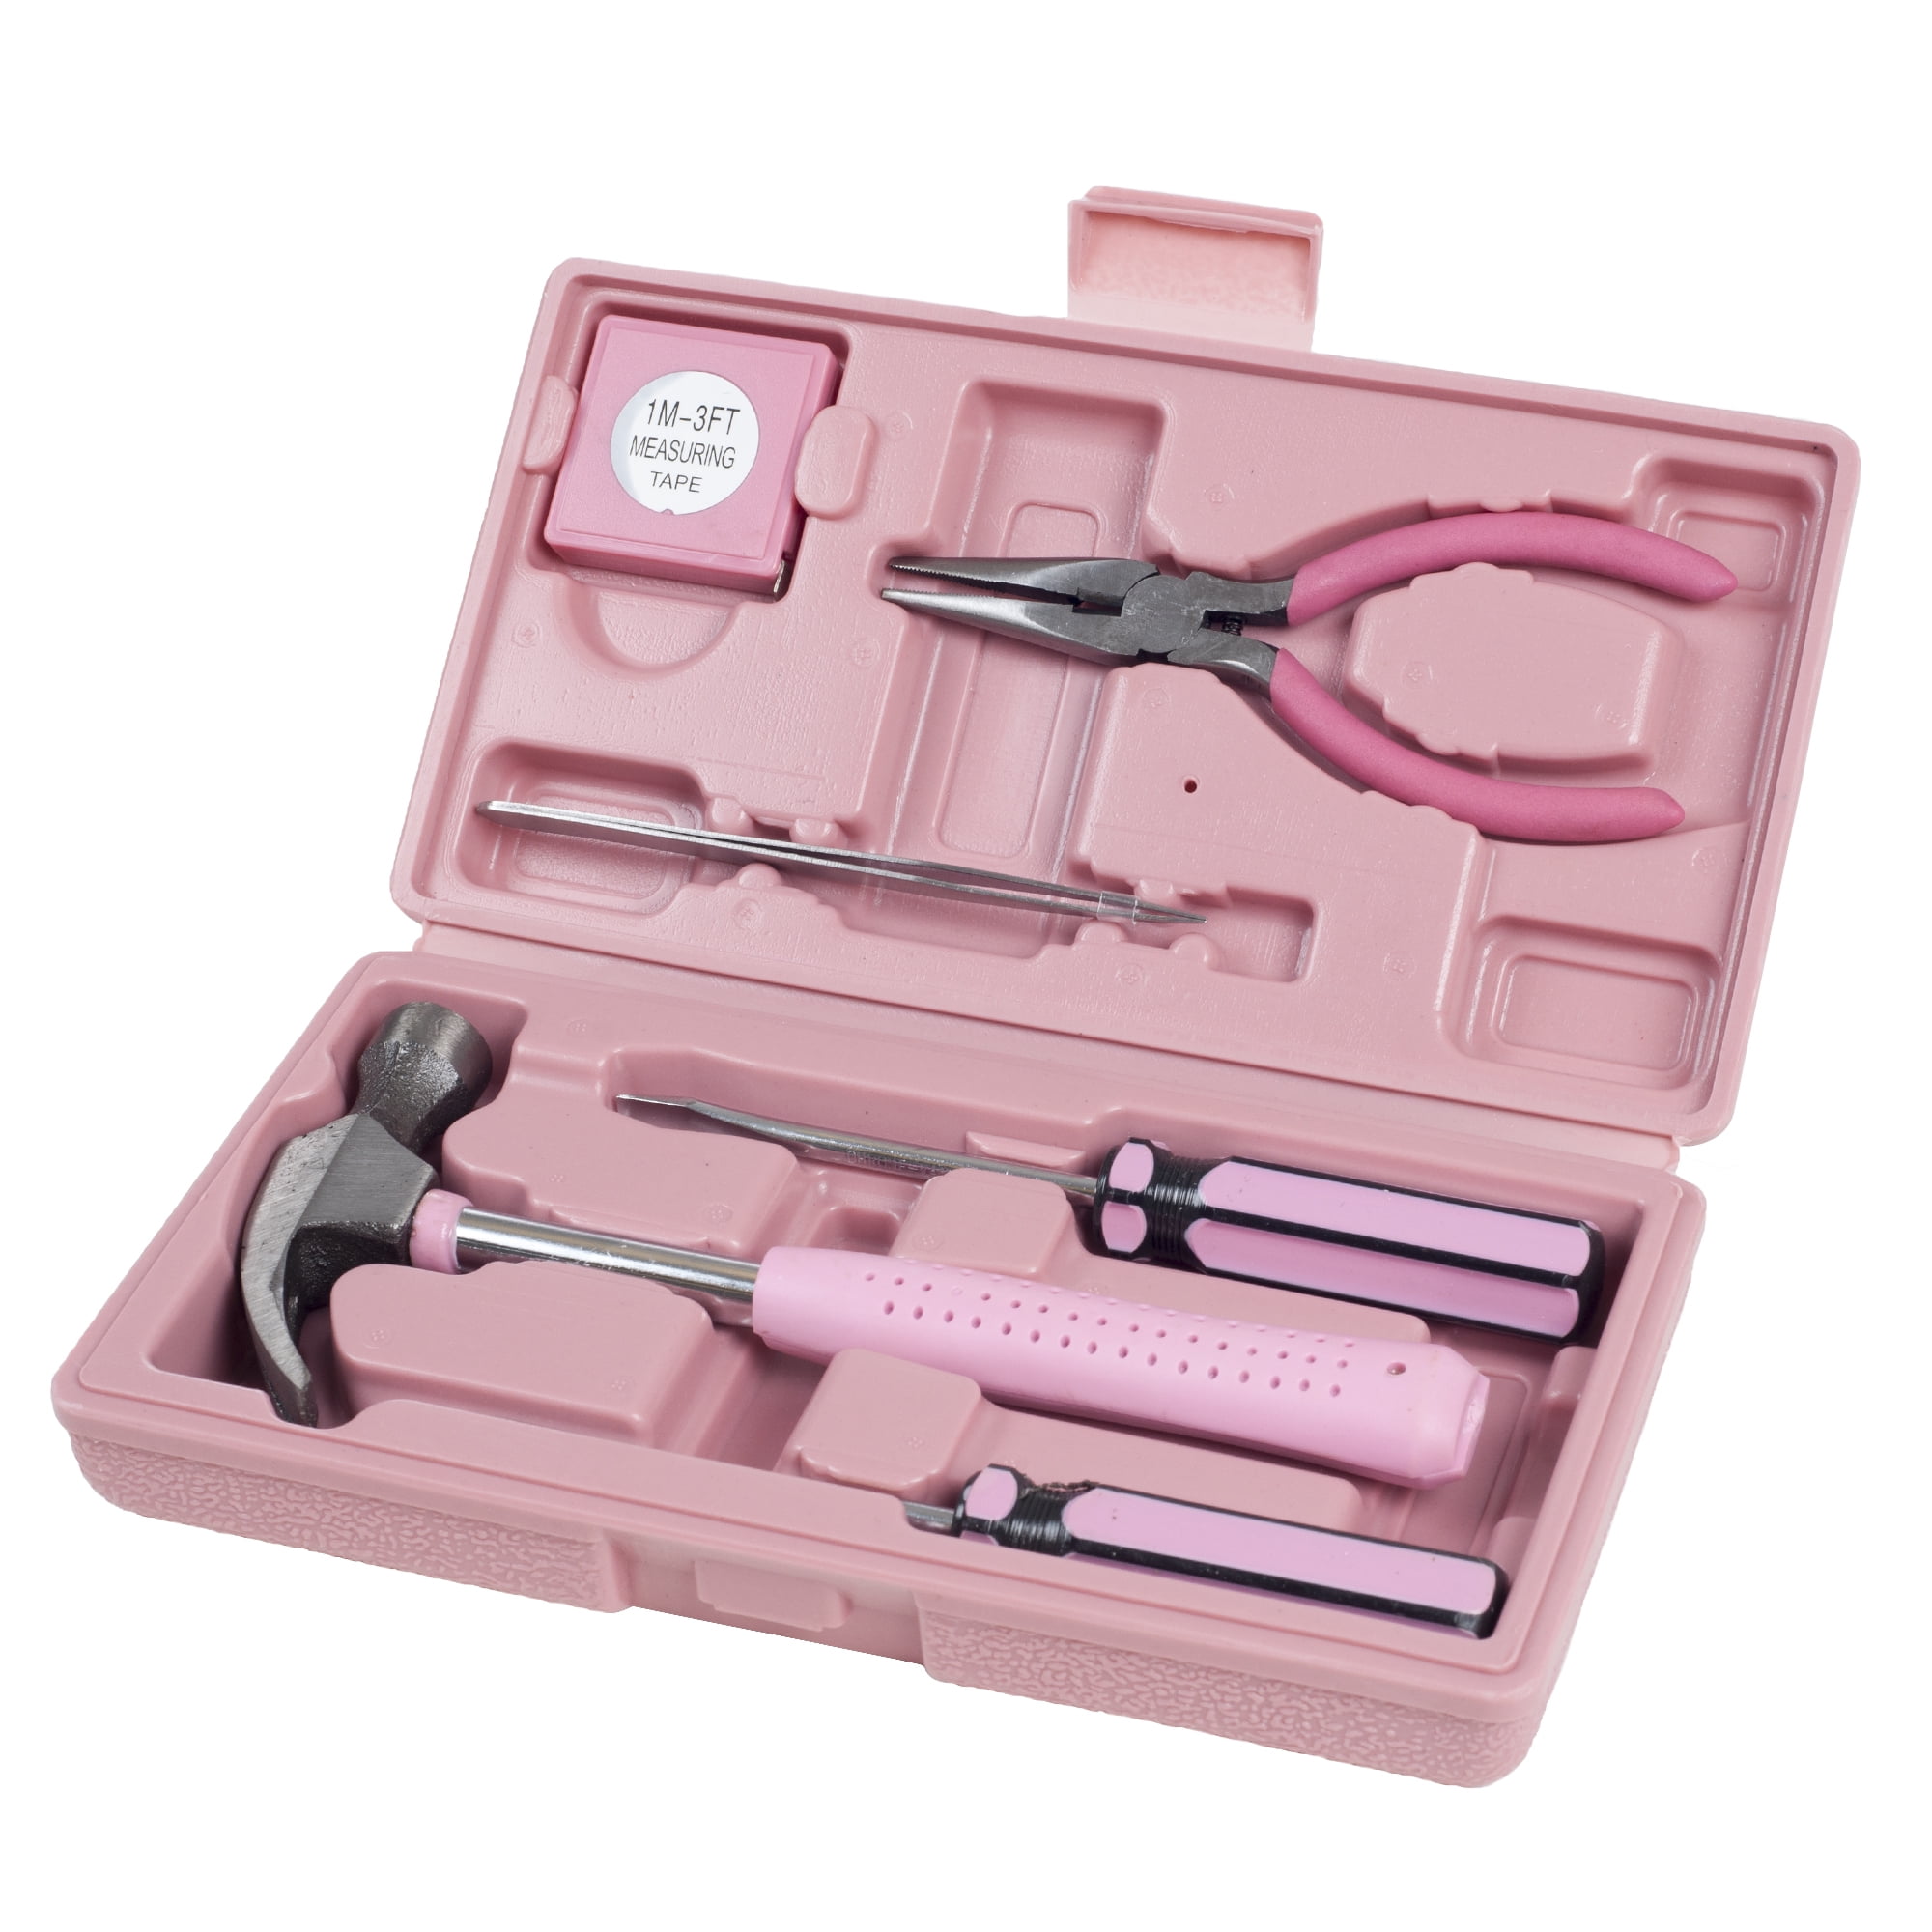 with 4 assorted screwdrivers and 1 hammer. 5-in-1 Hammer toolset